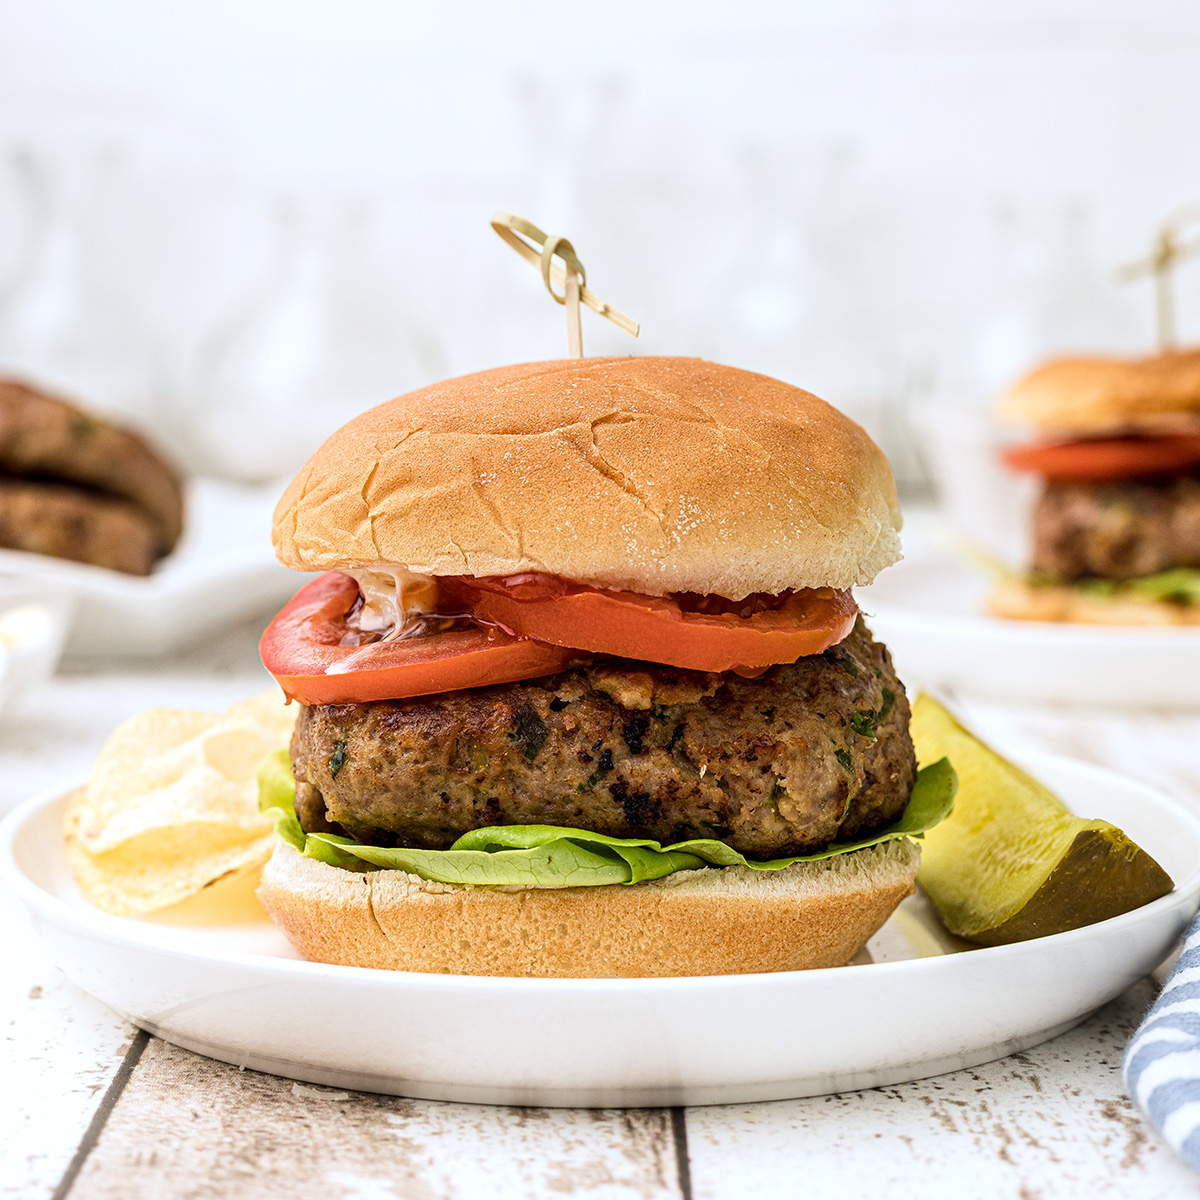 Juicy Grilled Turkey Burgers with Gruyere Cheese and Dijon Mustard